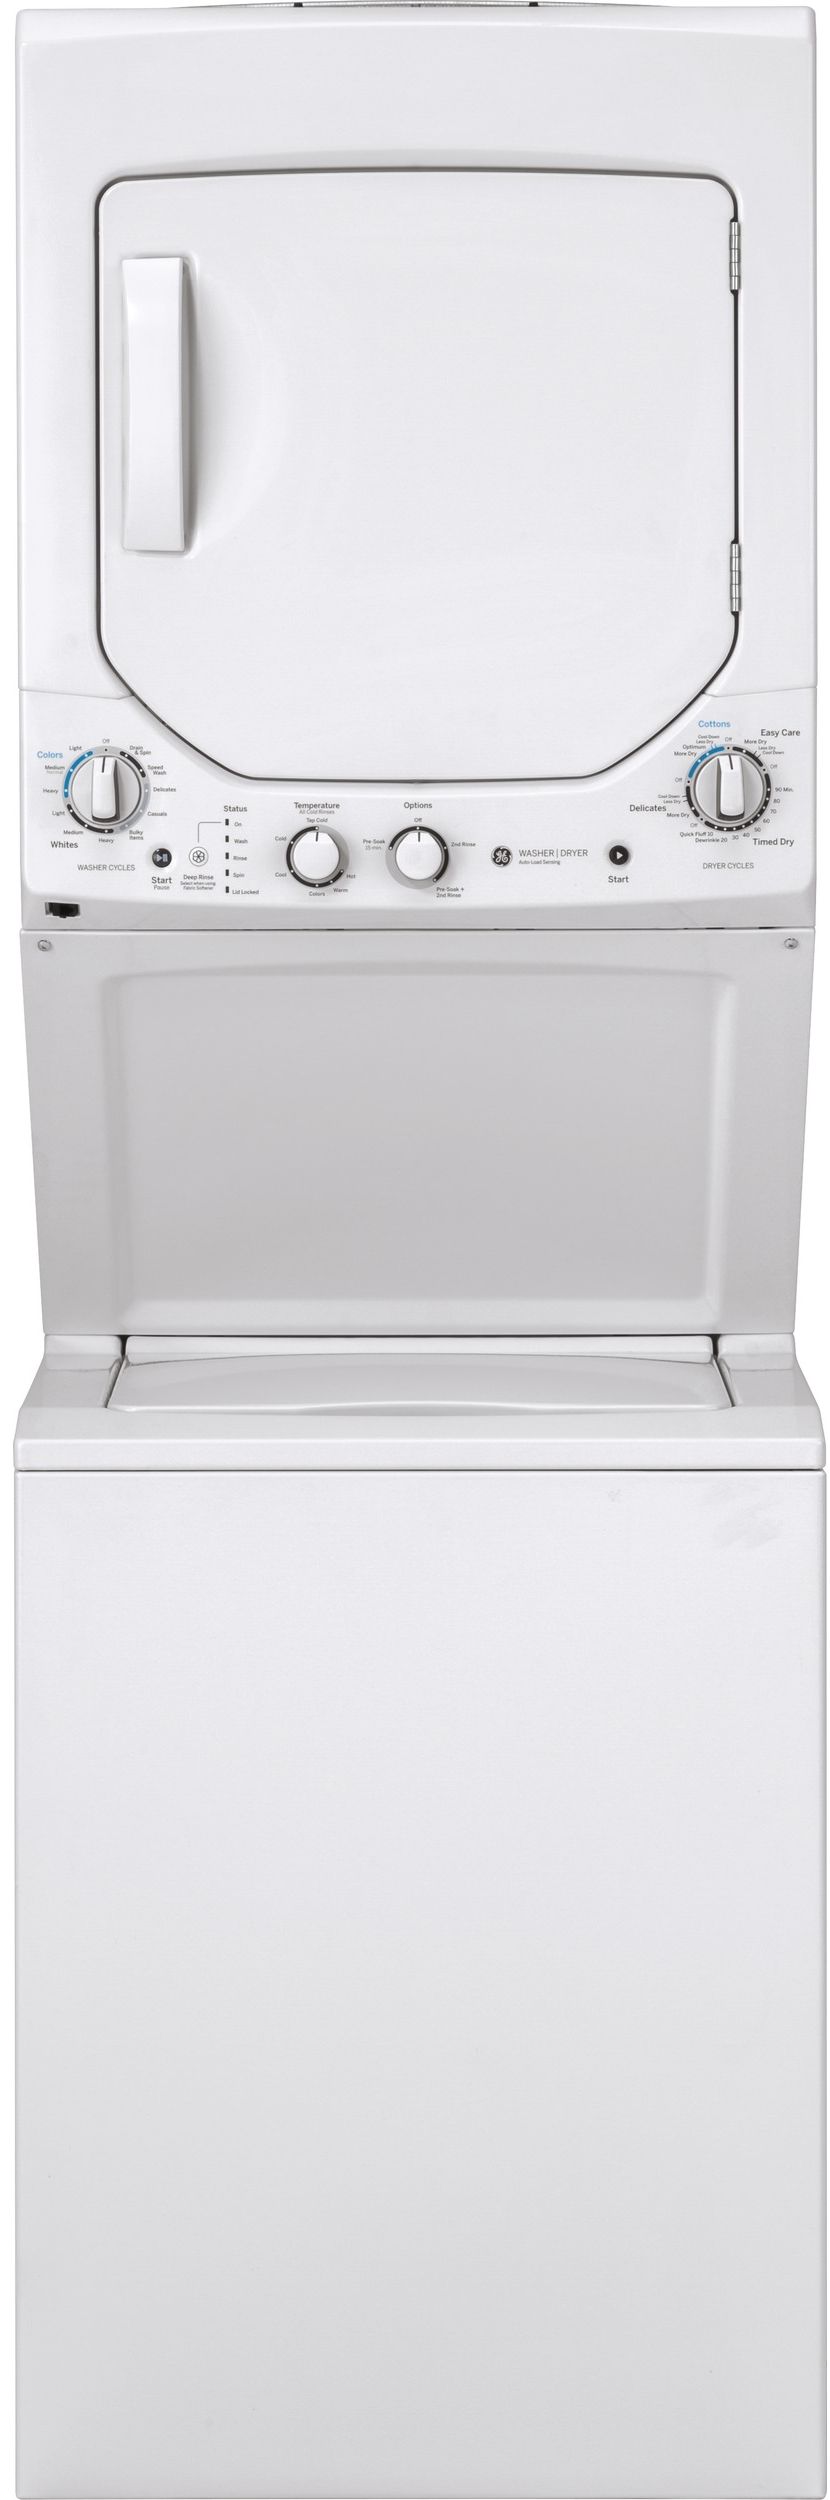 GE® Unitized Spacemaker® 2.3 Cu. Ft. Washer, 4.4 Cu. Ft. Dryer White On White Stack Laundry